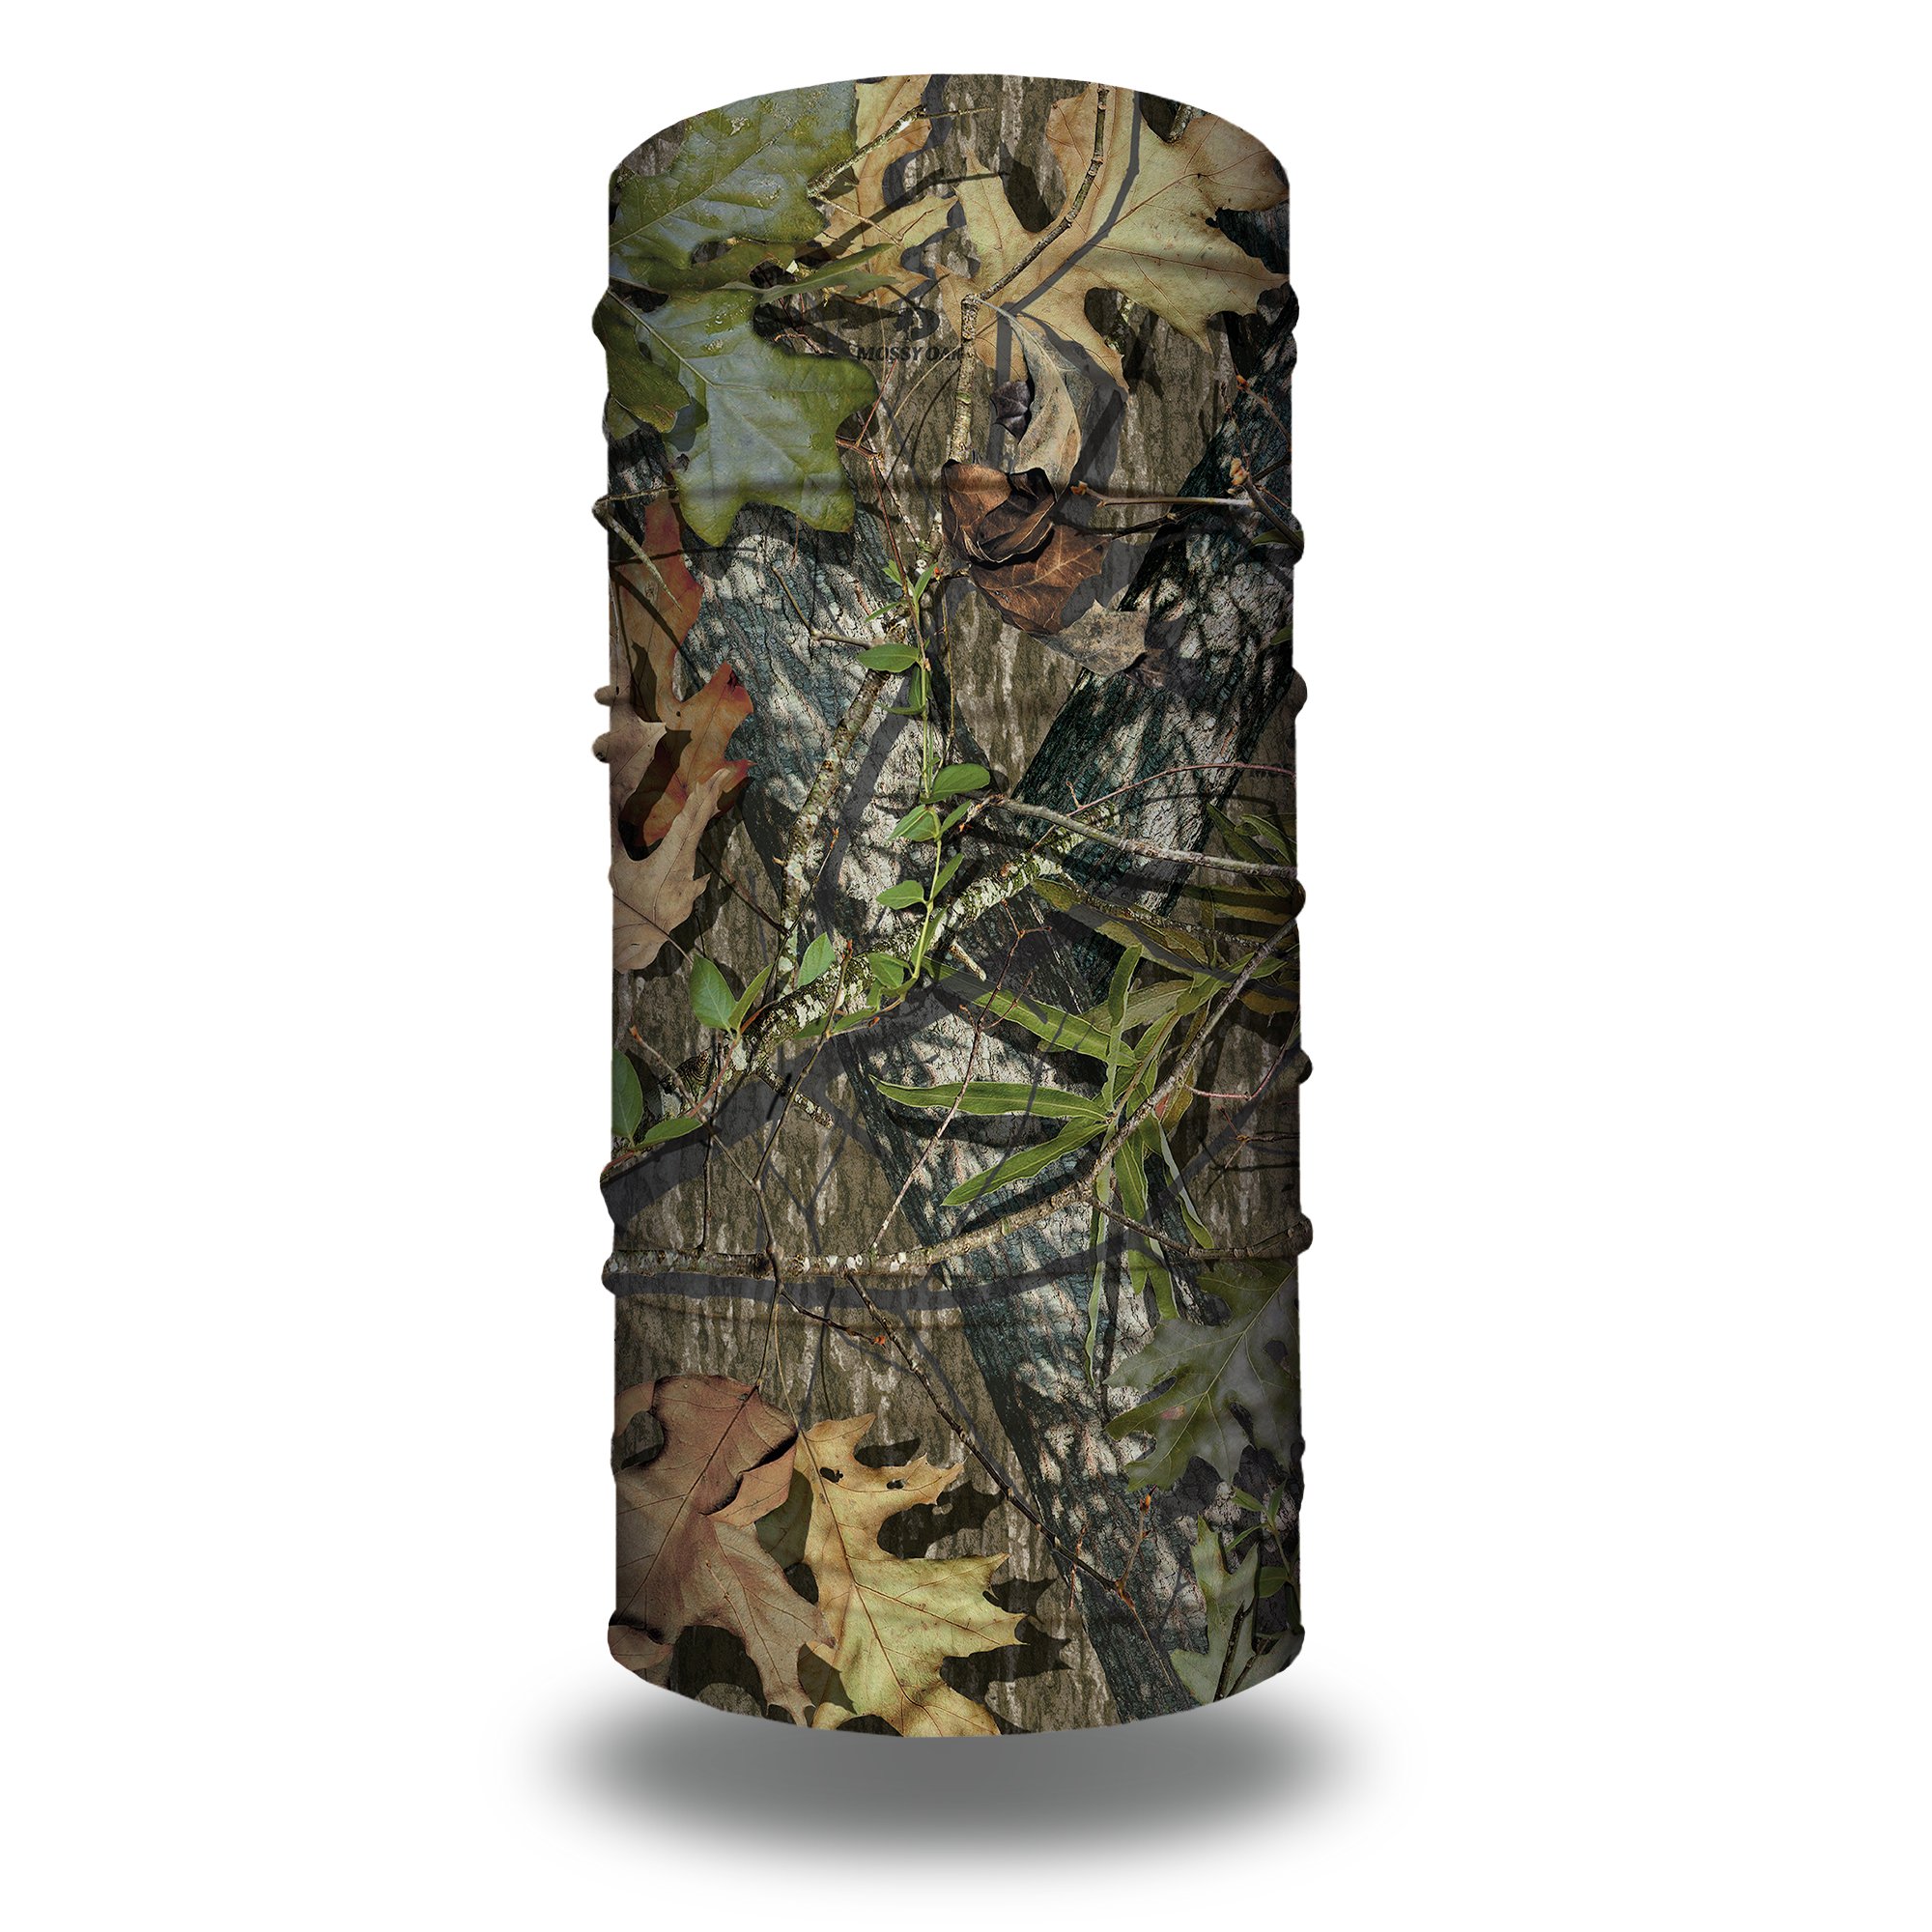 Sun Protection Neck Gaiter in Elements Camo Mossy Oak Fishing Face Mask 